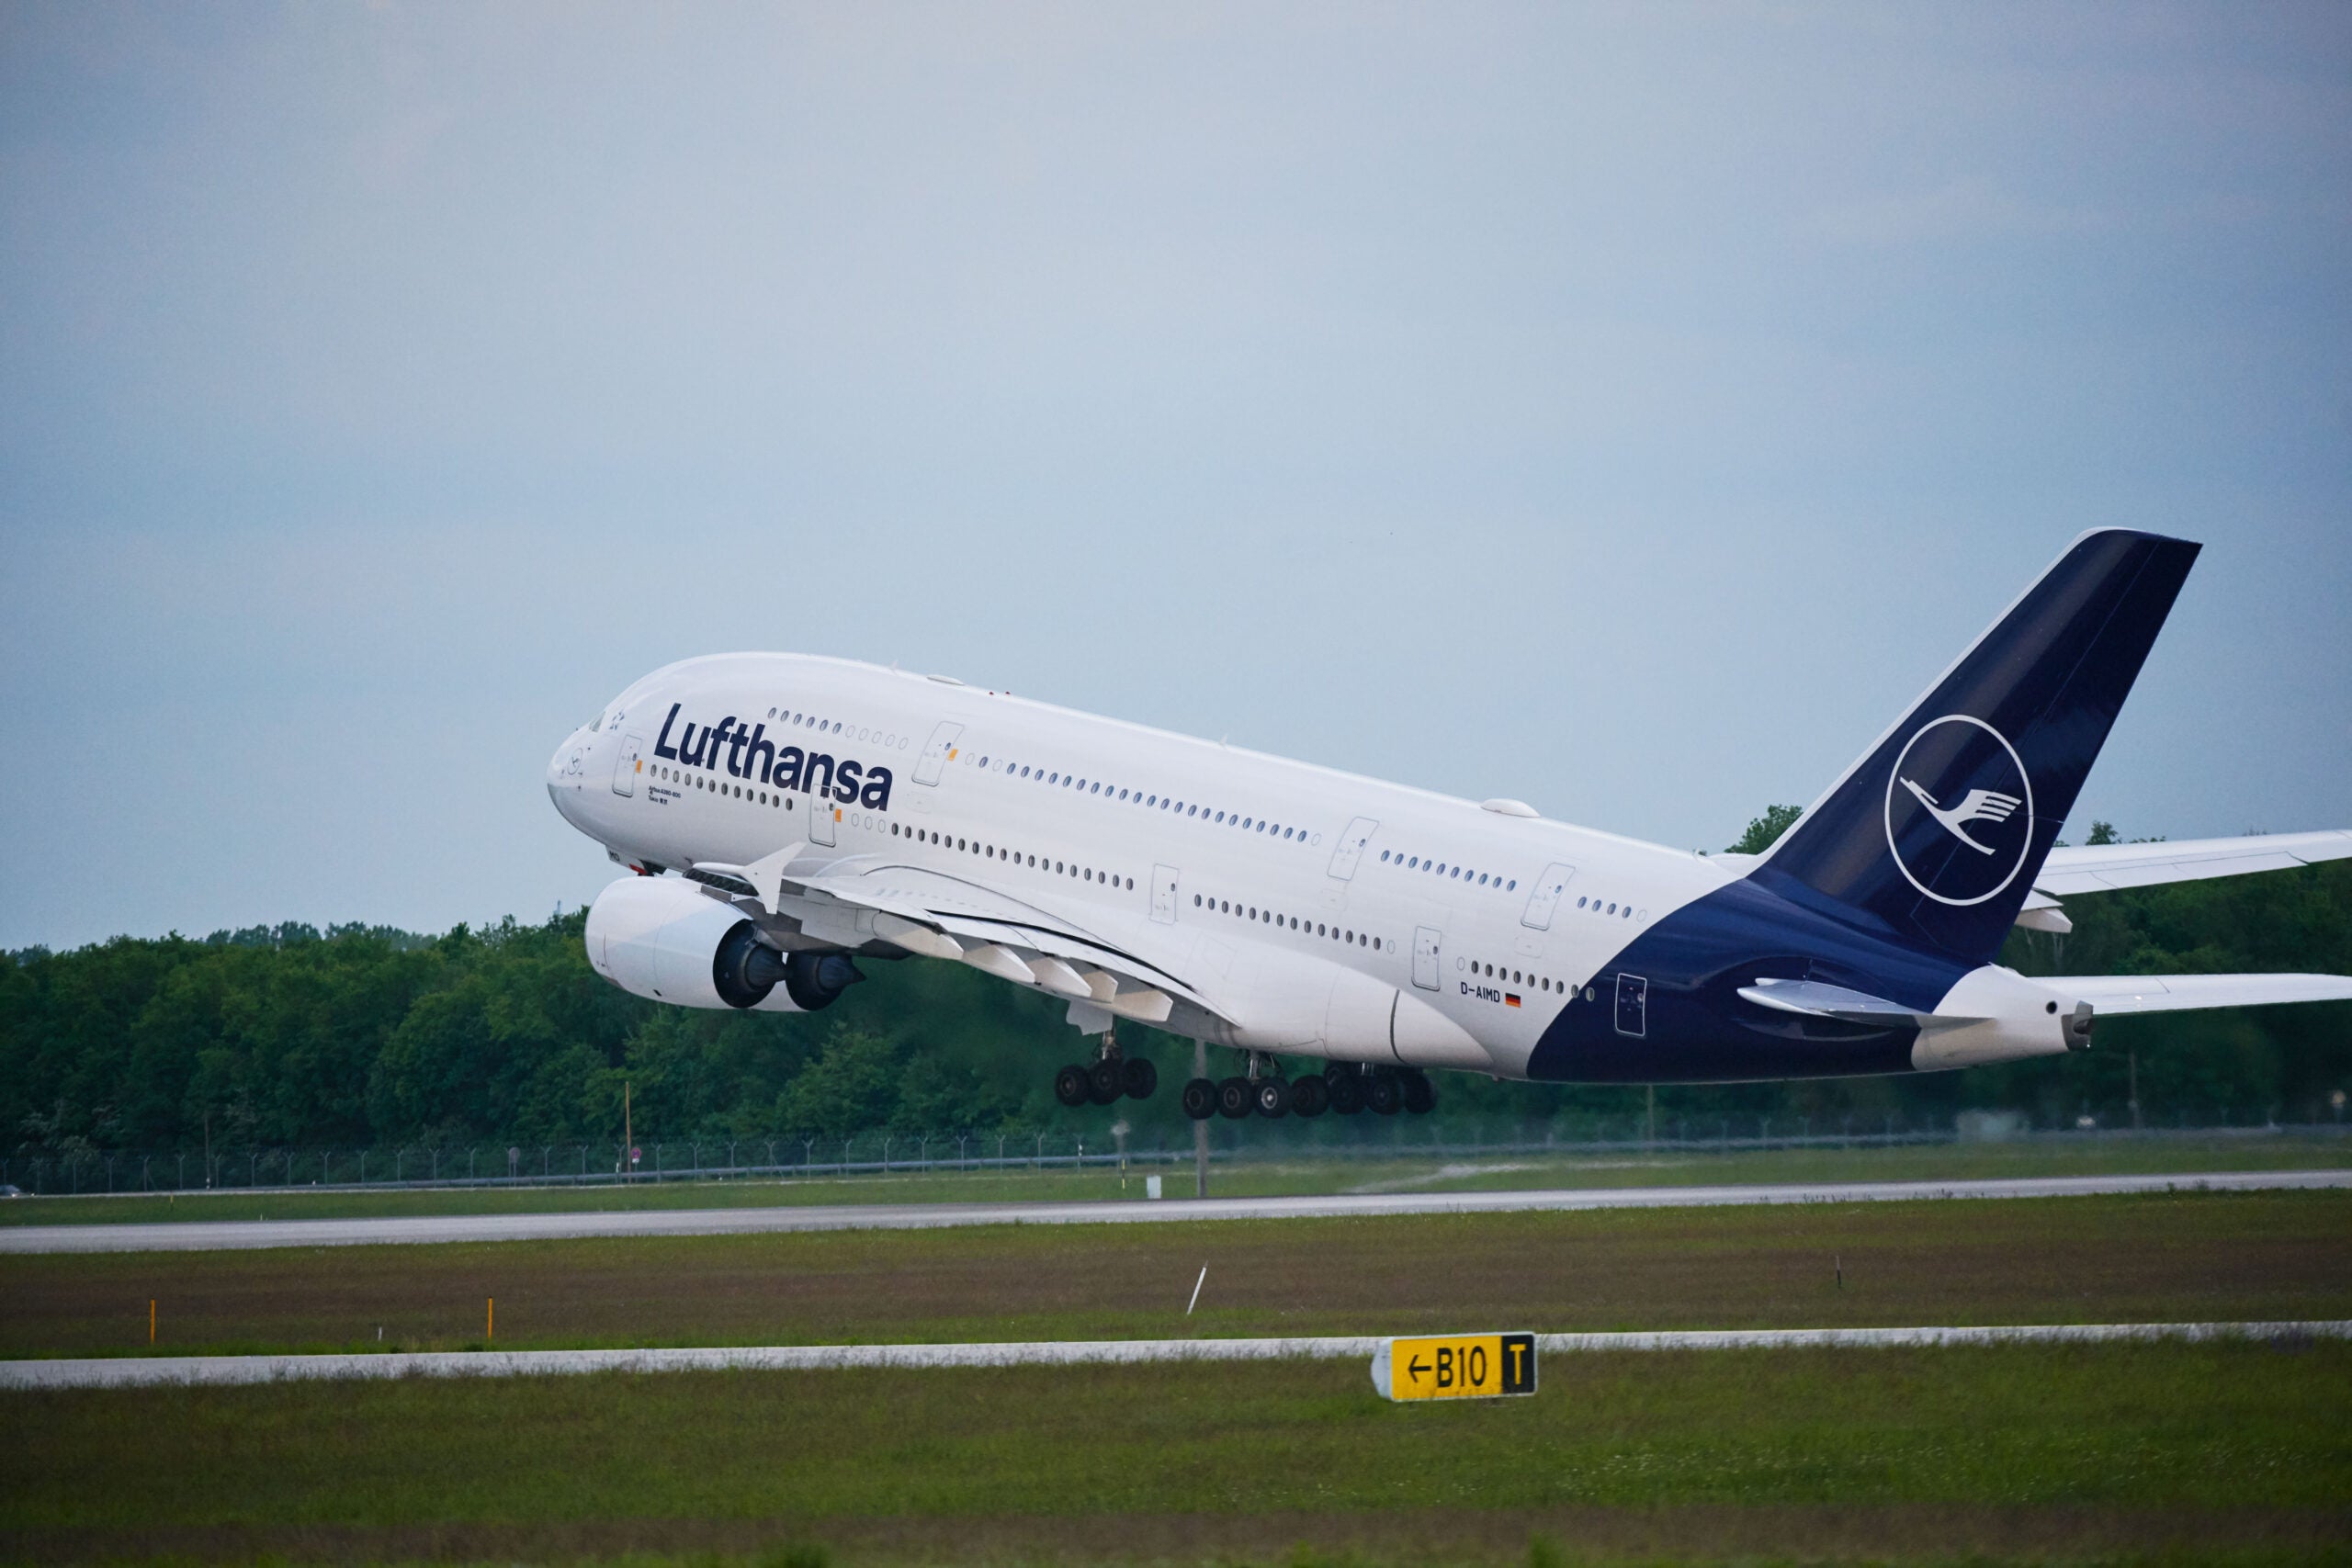 Lufthansa will bring back the Airbus A380 by summer